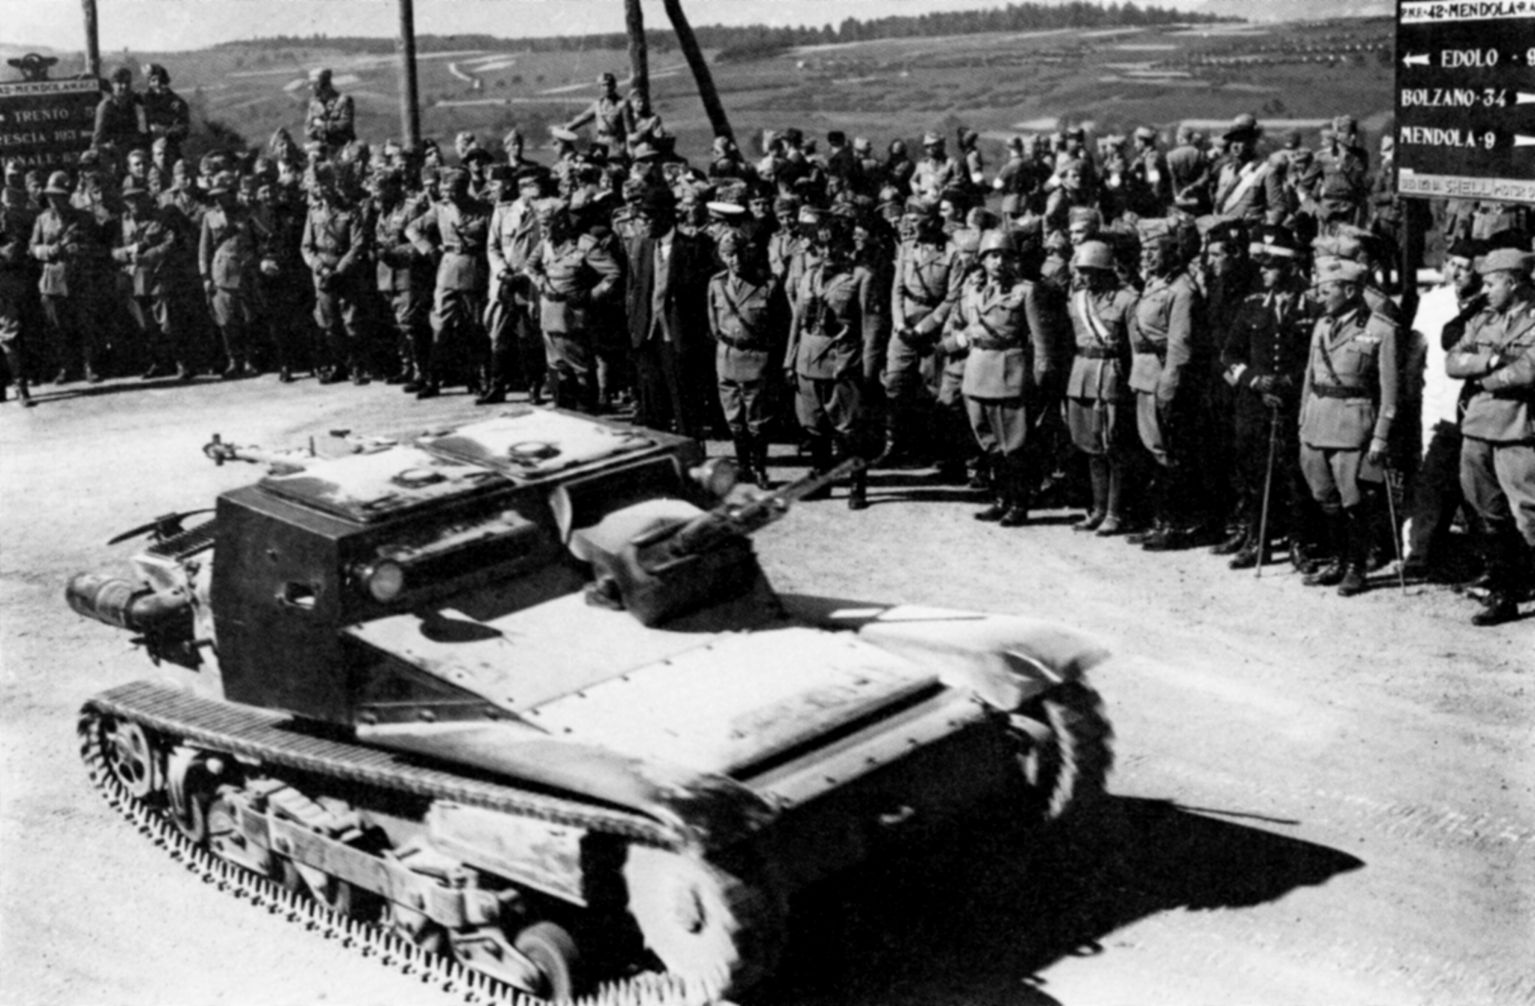 Observing maneuvers near the Austrian border in August 1935, Italian King Victor Emmanuel and Mussolini view a new light tank. Italian armor, though somewhat improved between the world wars, remained inadequate under combat conditions during World War II. (Imperial War Museum)